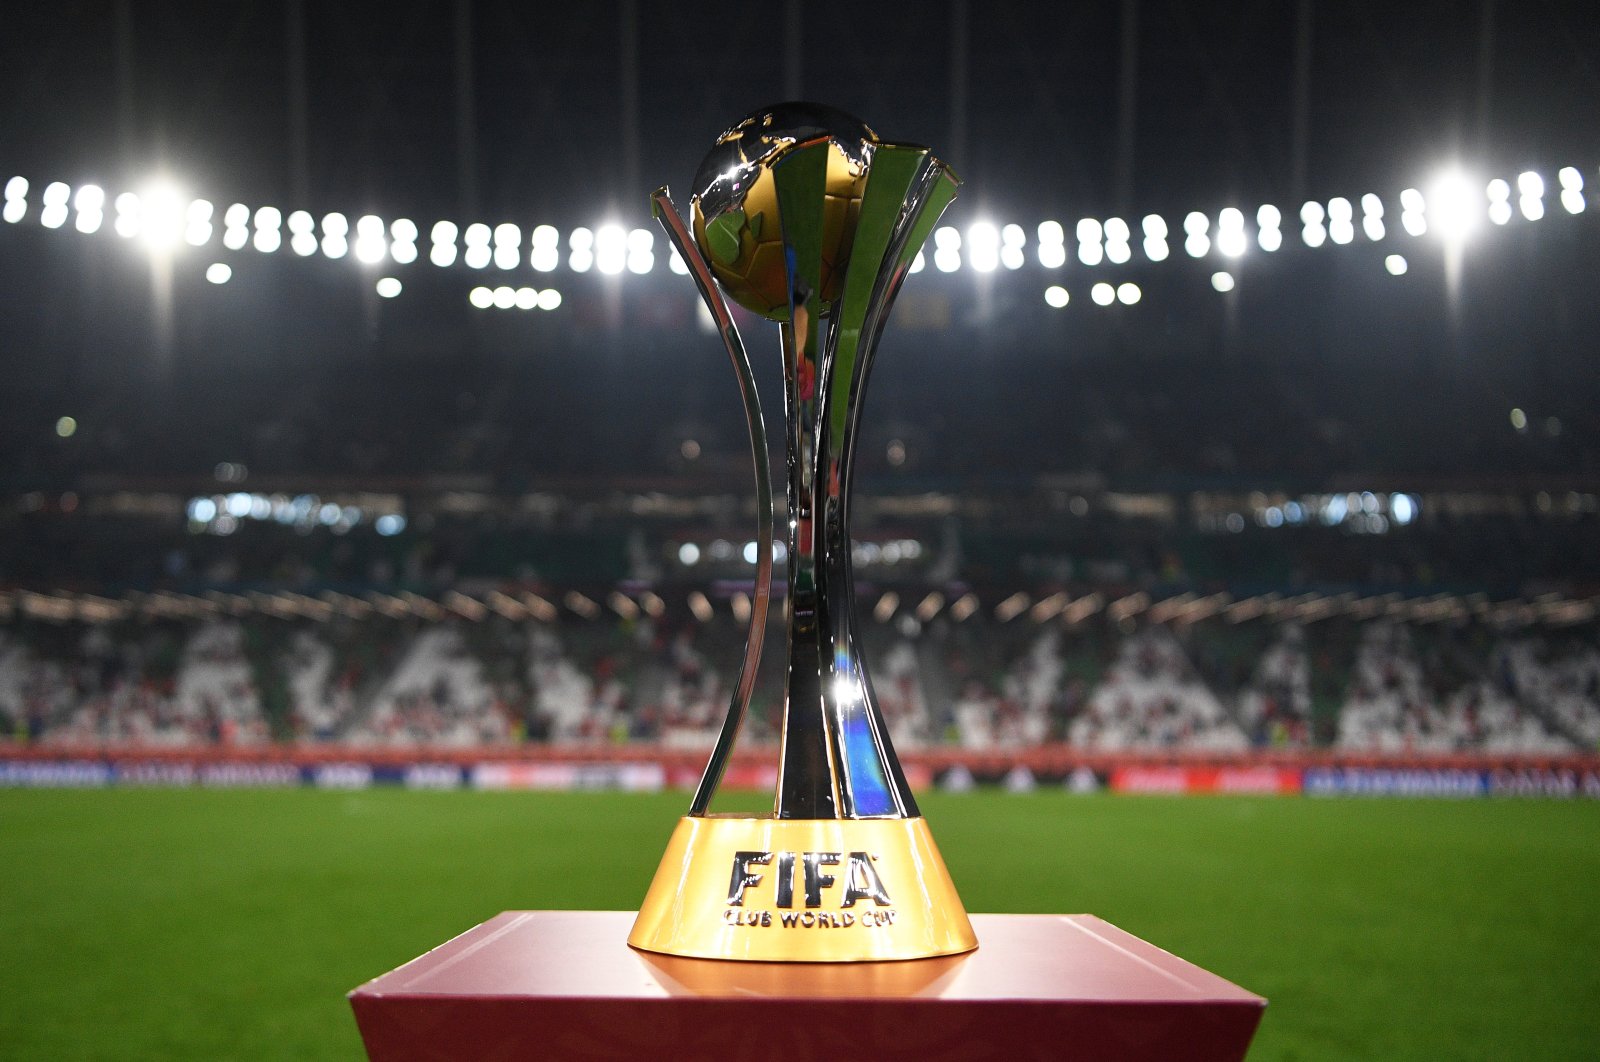 The FIFA Club World Cup trophy is on display ahead of the final match between Bayern Munich and FC Tigres at the Education City Stadium in Doha, Qatar, Feb. 11, 2021. (Getty Images)